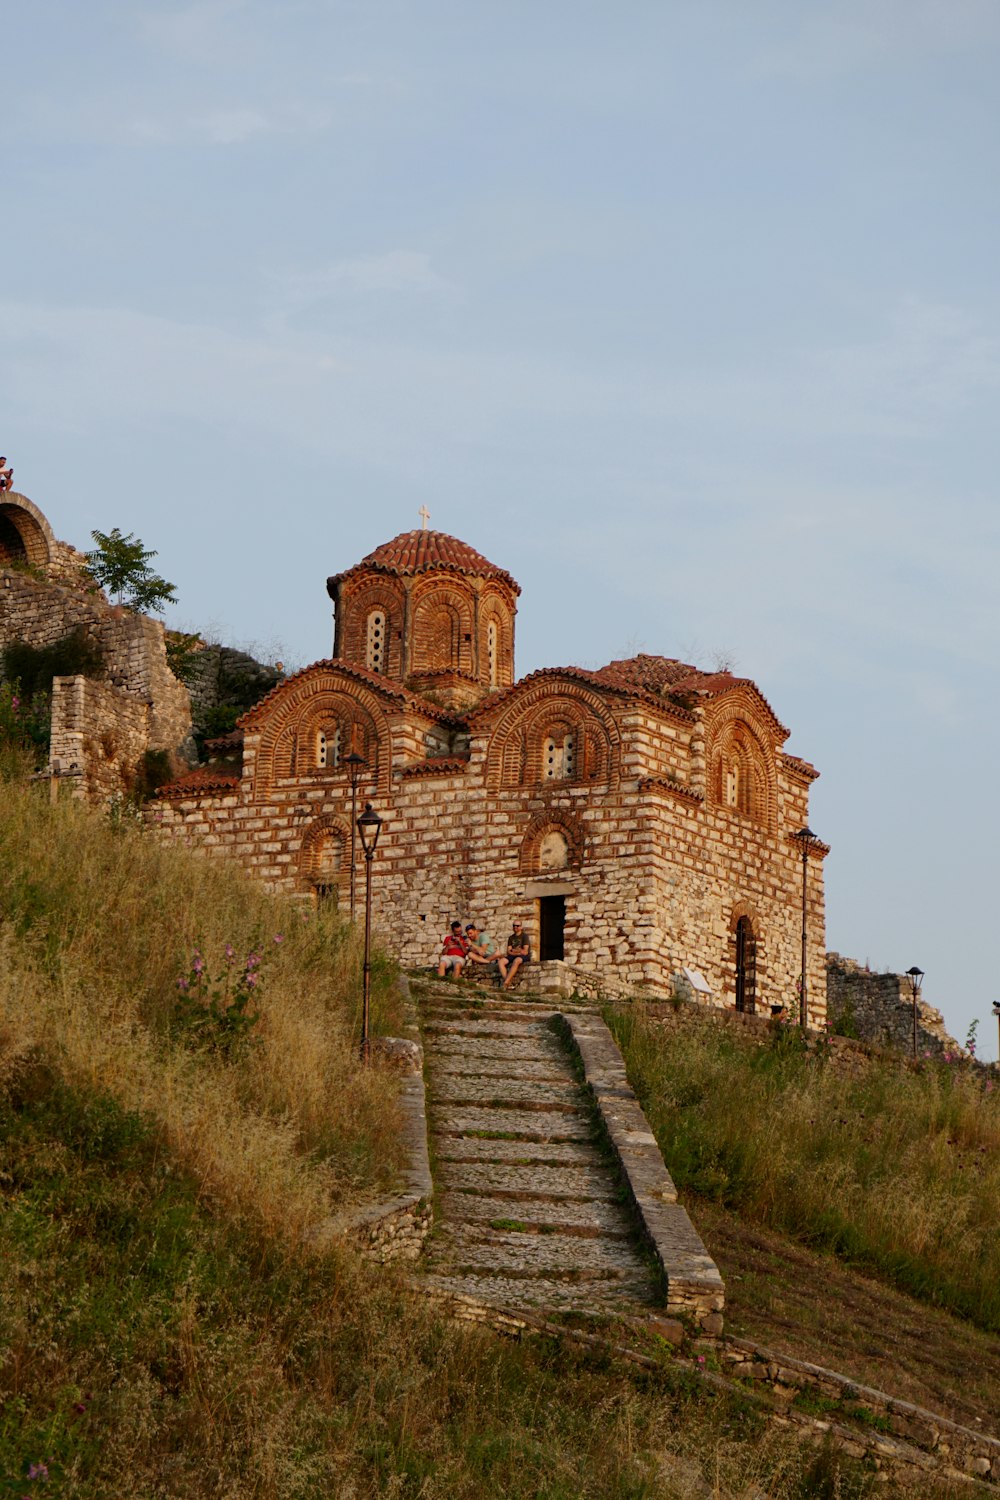 a stone building on a hill with stairs leading up to it